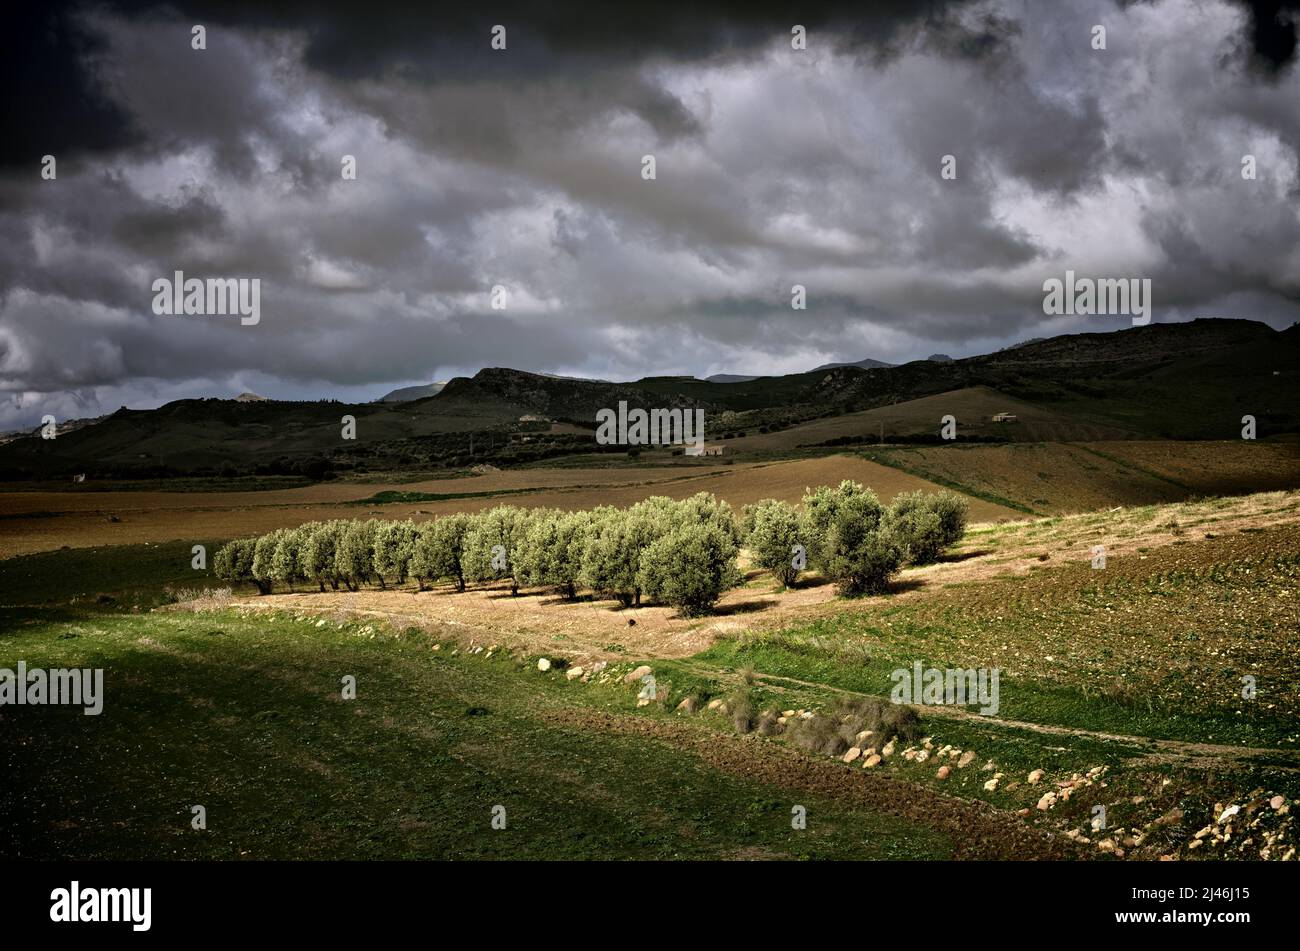 Sicily landscape with olive grove and dramatic sky Stock Photo